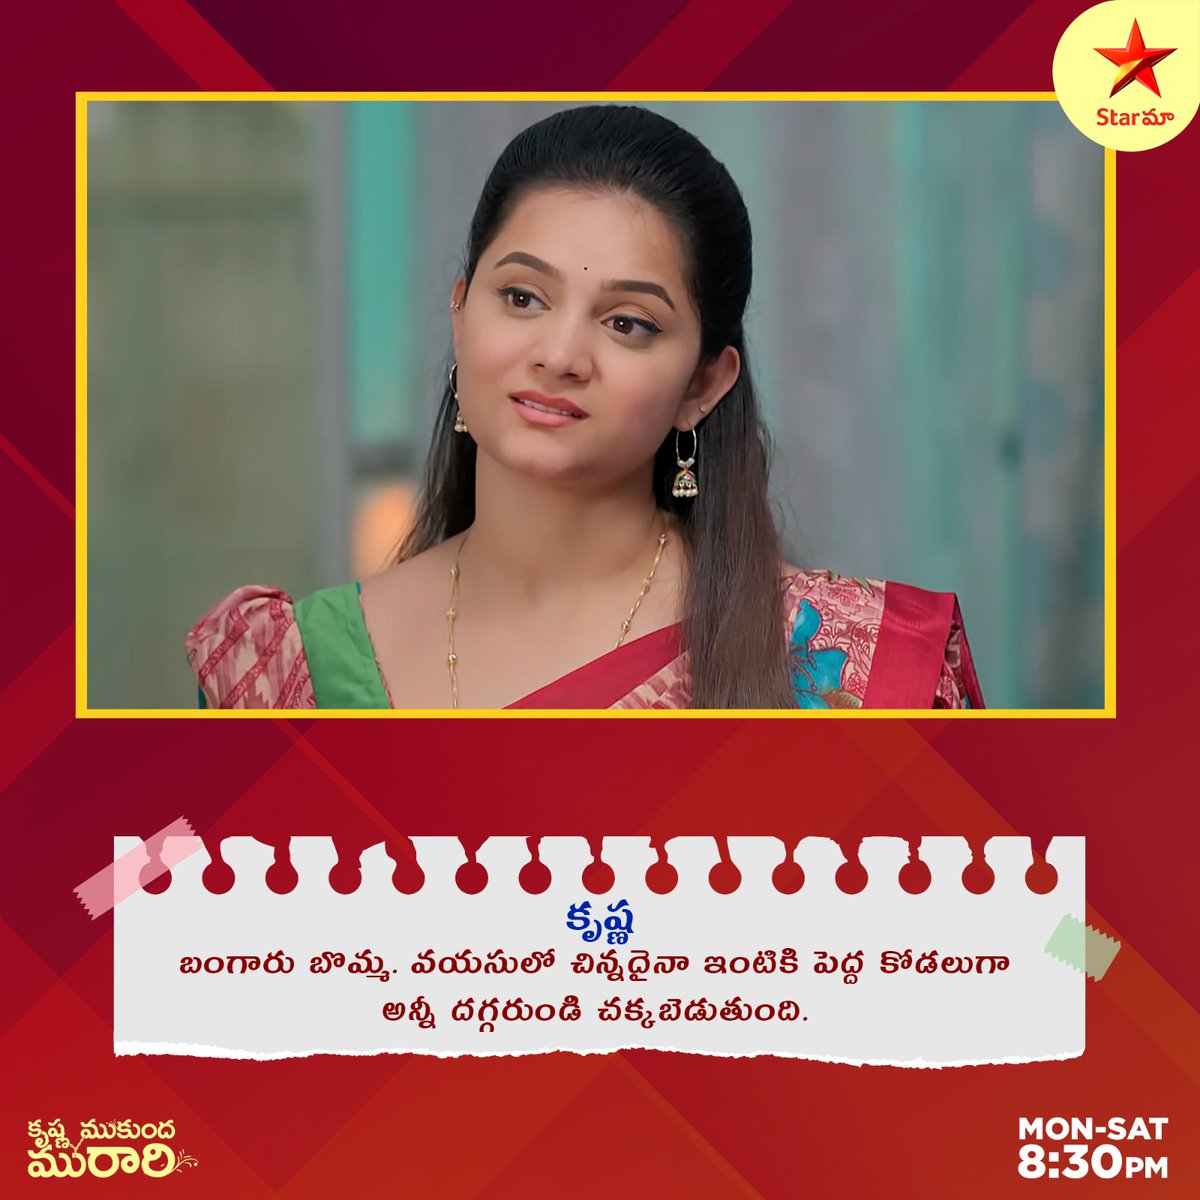 Krishna, a pure-hearted woman and the devoted wife of Murari, who shoulders all responsibilities with grace and love for her family. 💖 Join us as we witness Krishna's inspiring journey in #Krishnamukundamurari on Star Maa. Don't miss her heartfelt story! 🌟 #StarMaaSerials